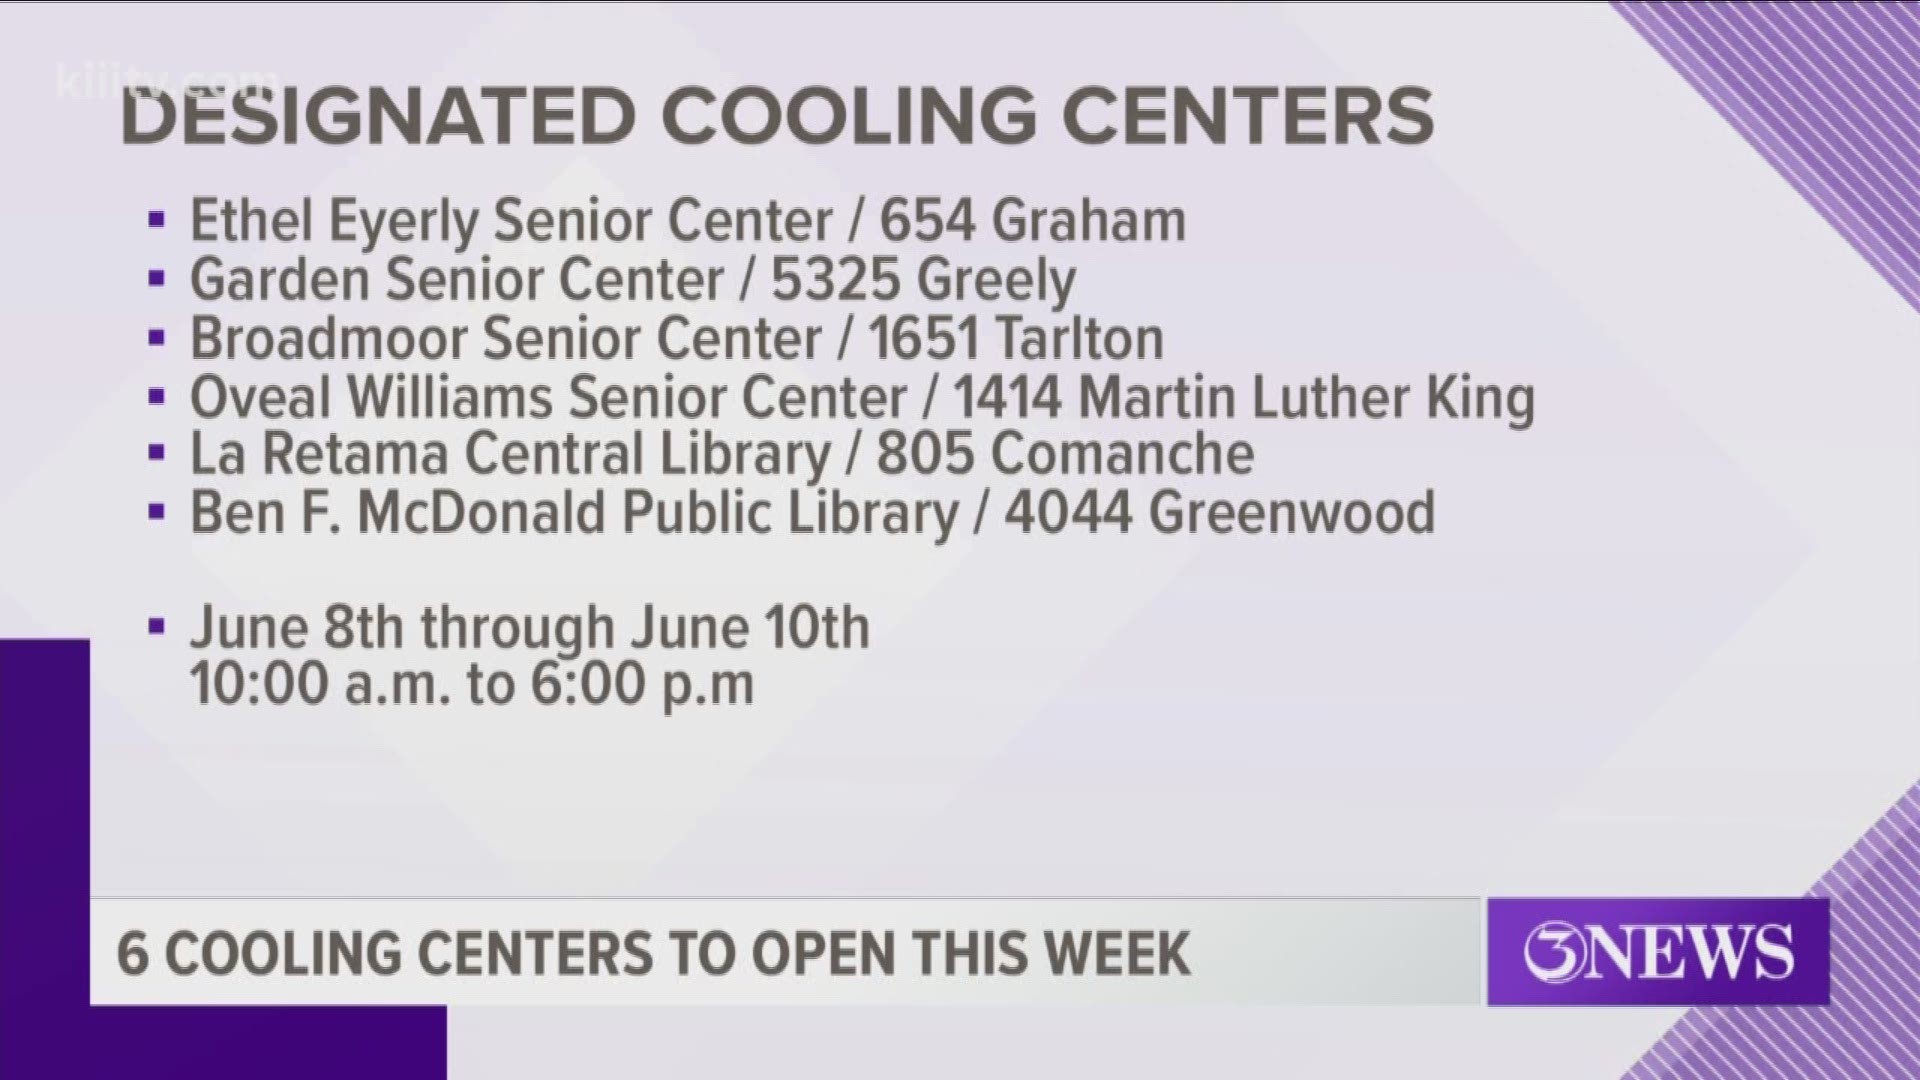 The City will open six locations as temporary cooling centers Monday, June 8th through Wednesday, June 10th from 10:00 a.m. to 6:00 p.m.